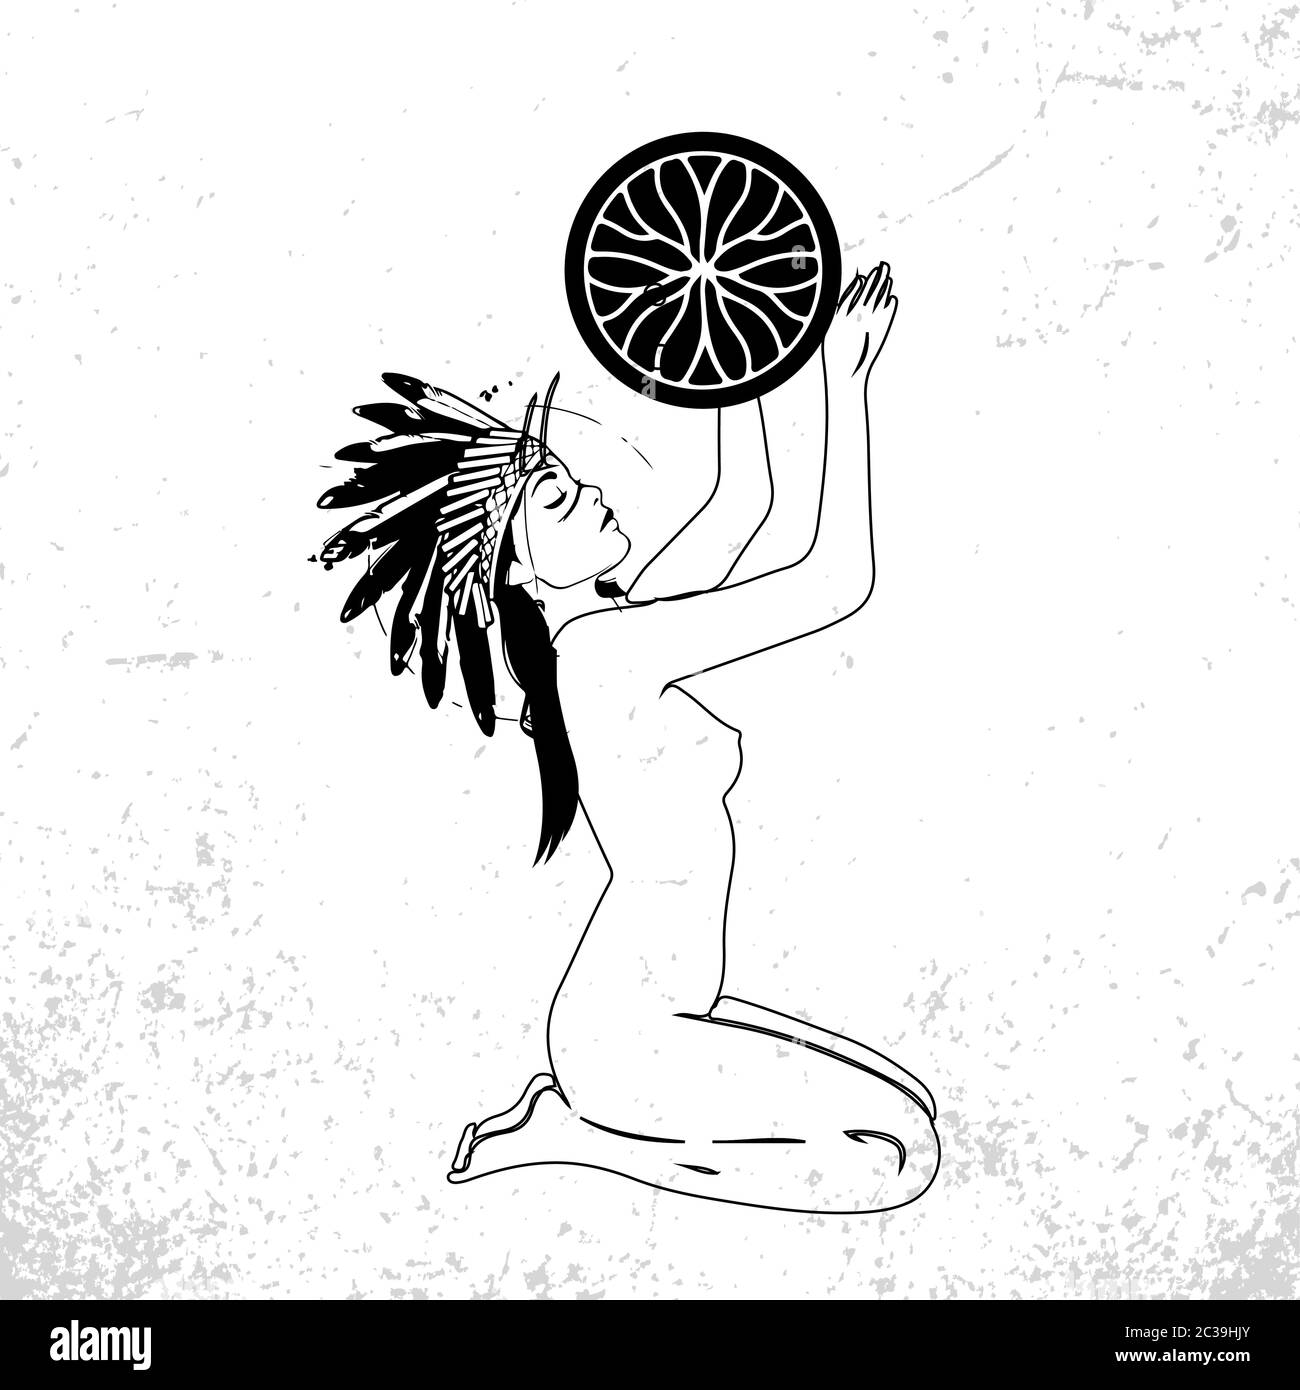 Vector Black and White shaman Woman with a tambourine Illustration. Sketch abstract to Create Distressed Effect. Stock Vector